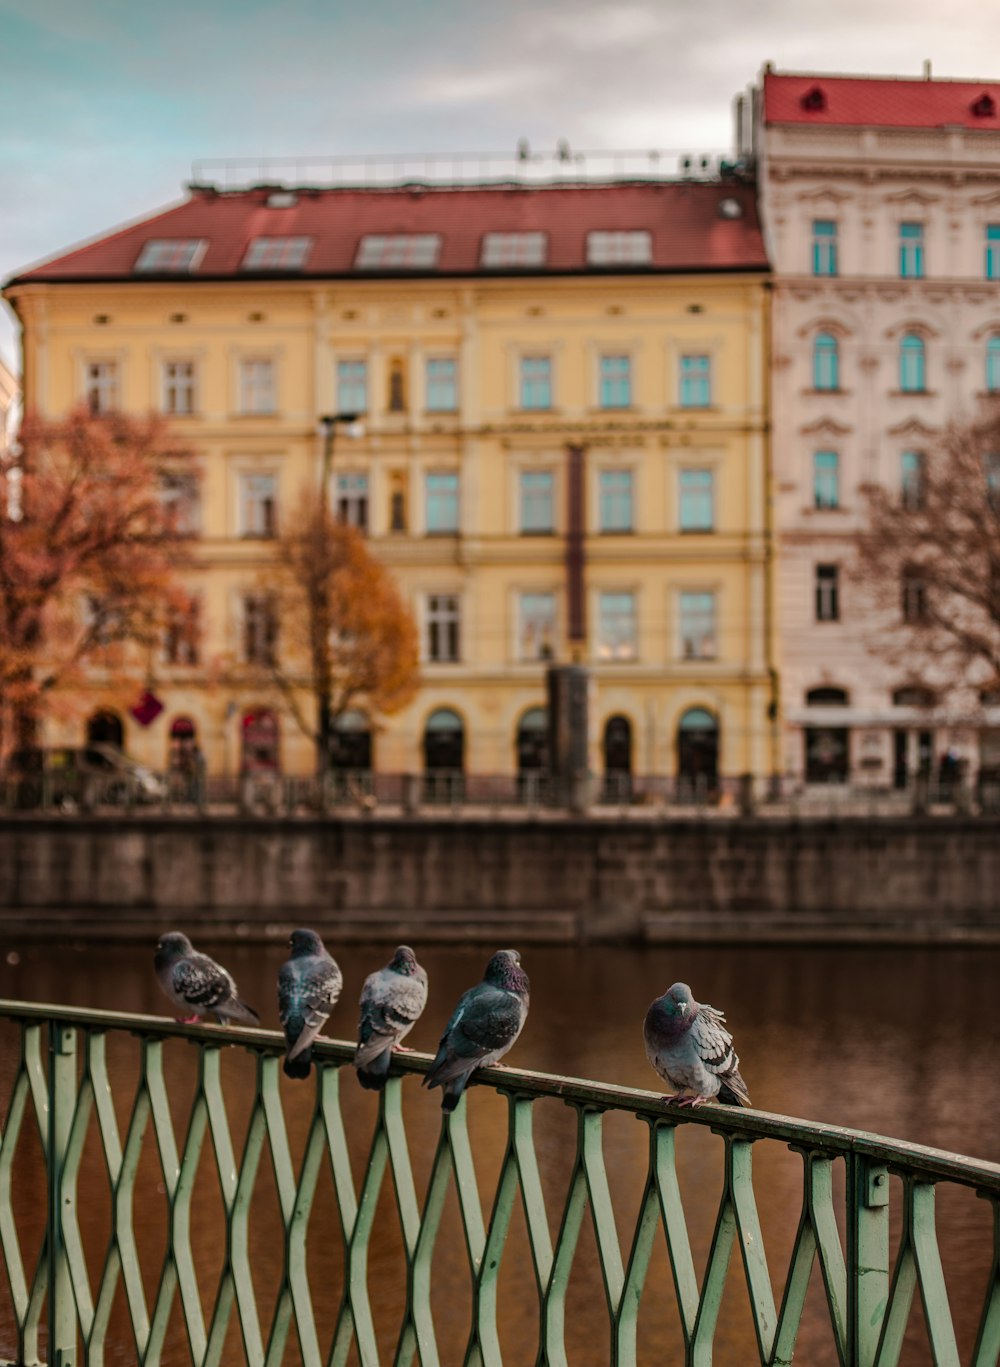 flock of birds perched on railings during daytime